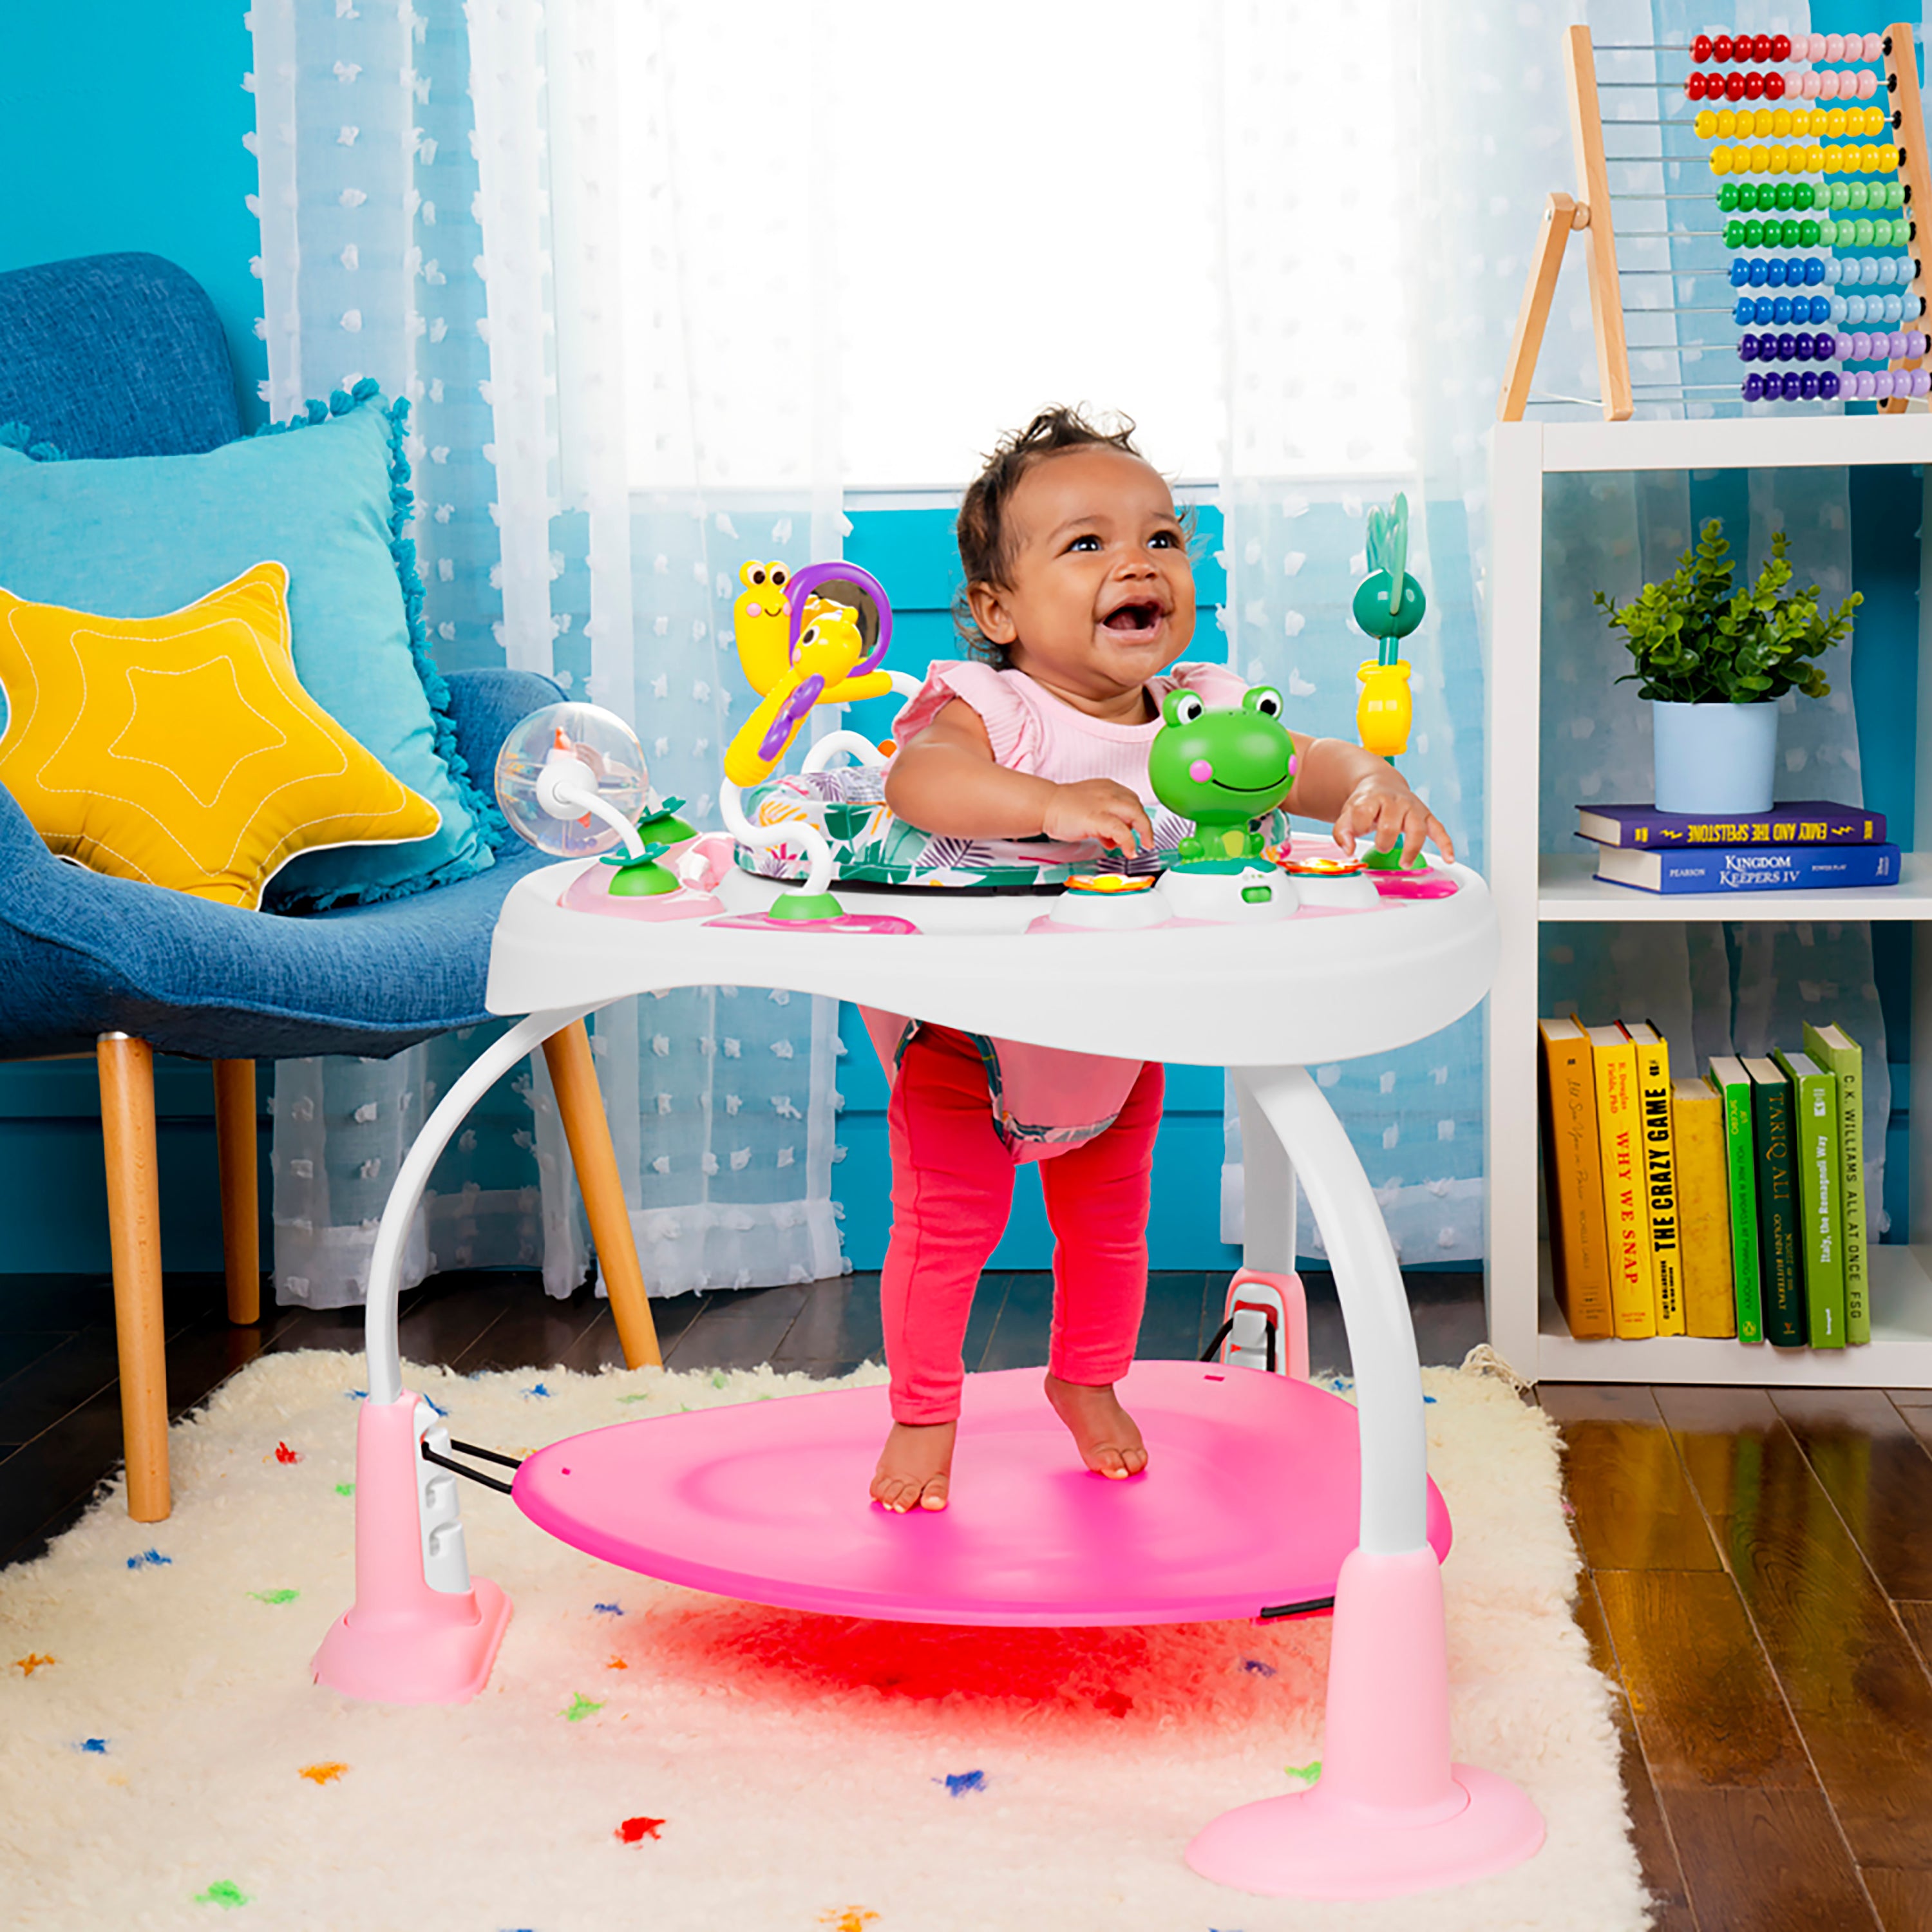 Bright Starts - Bounce Bounce Baby 2-in-1 Activity Jumper & Table - Playful Palms